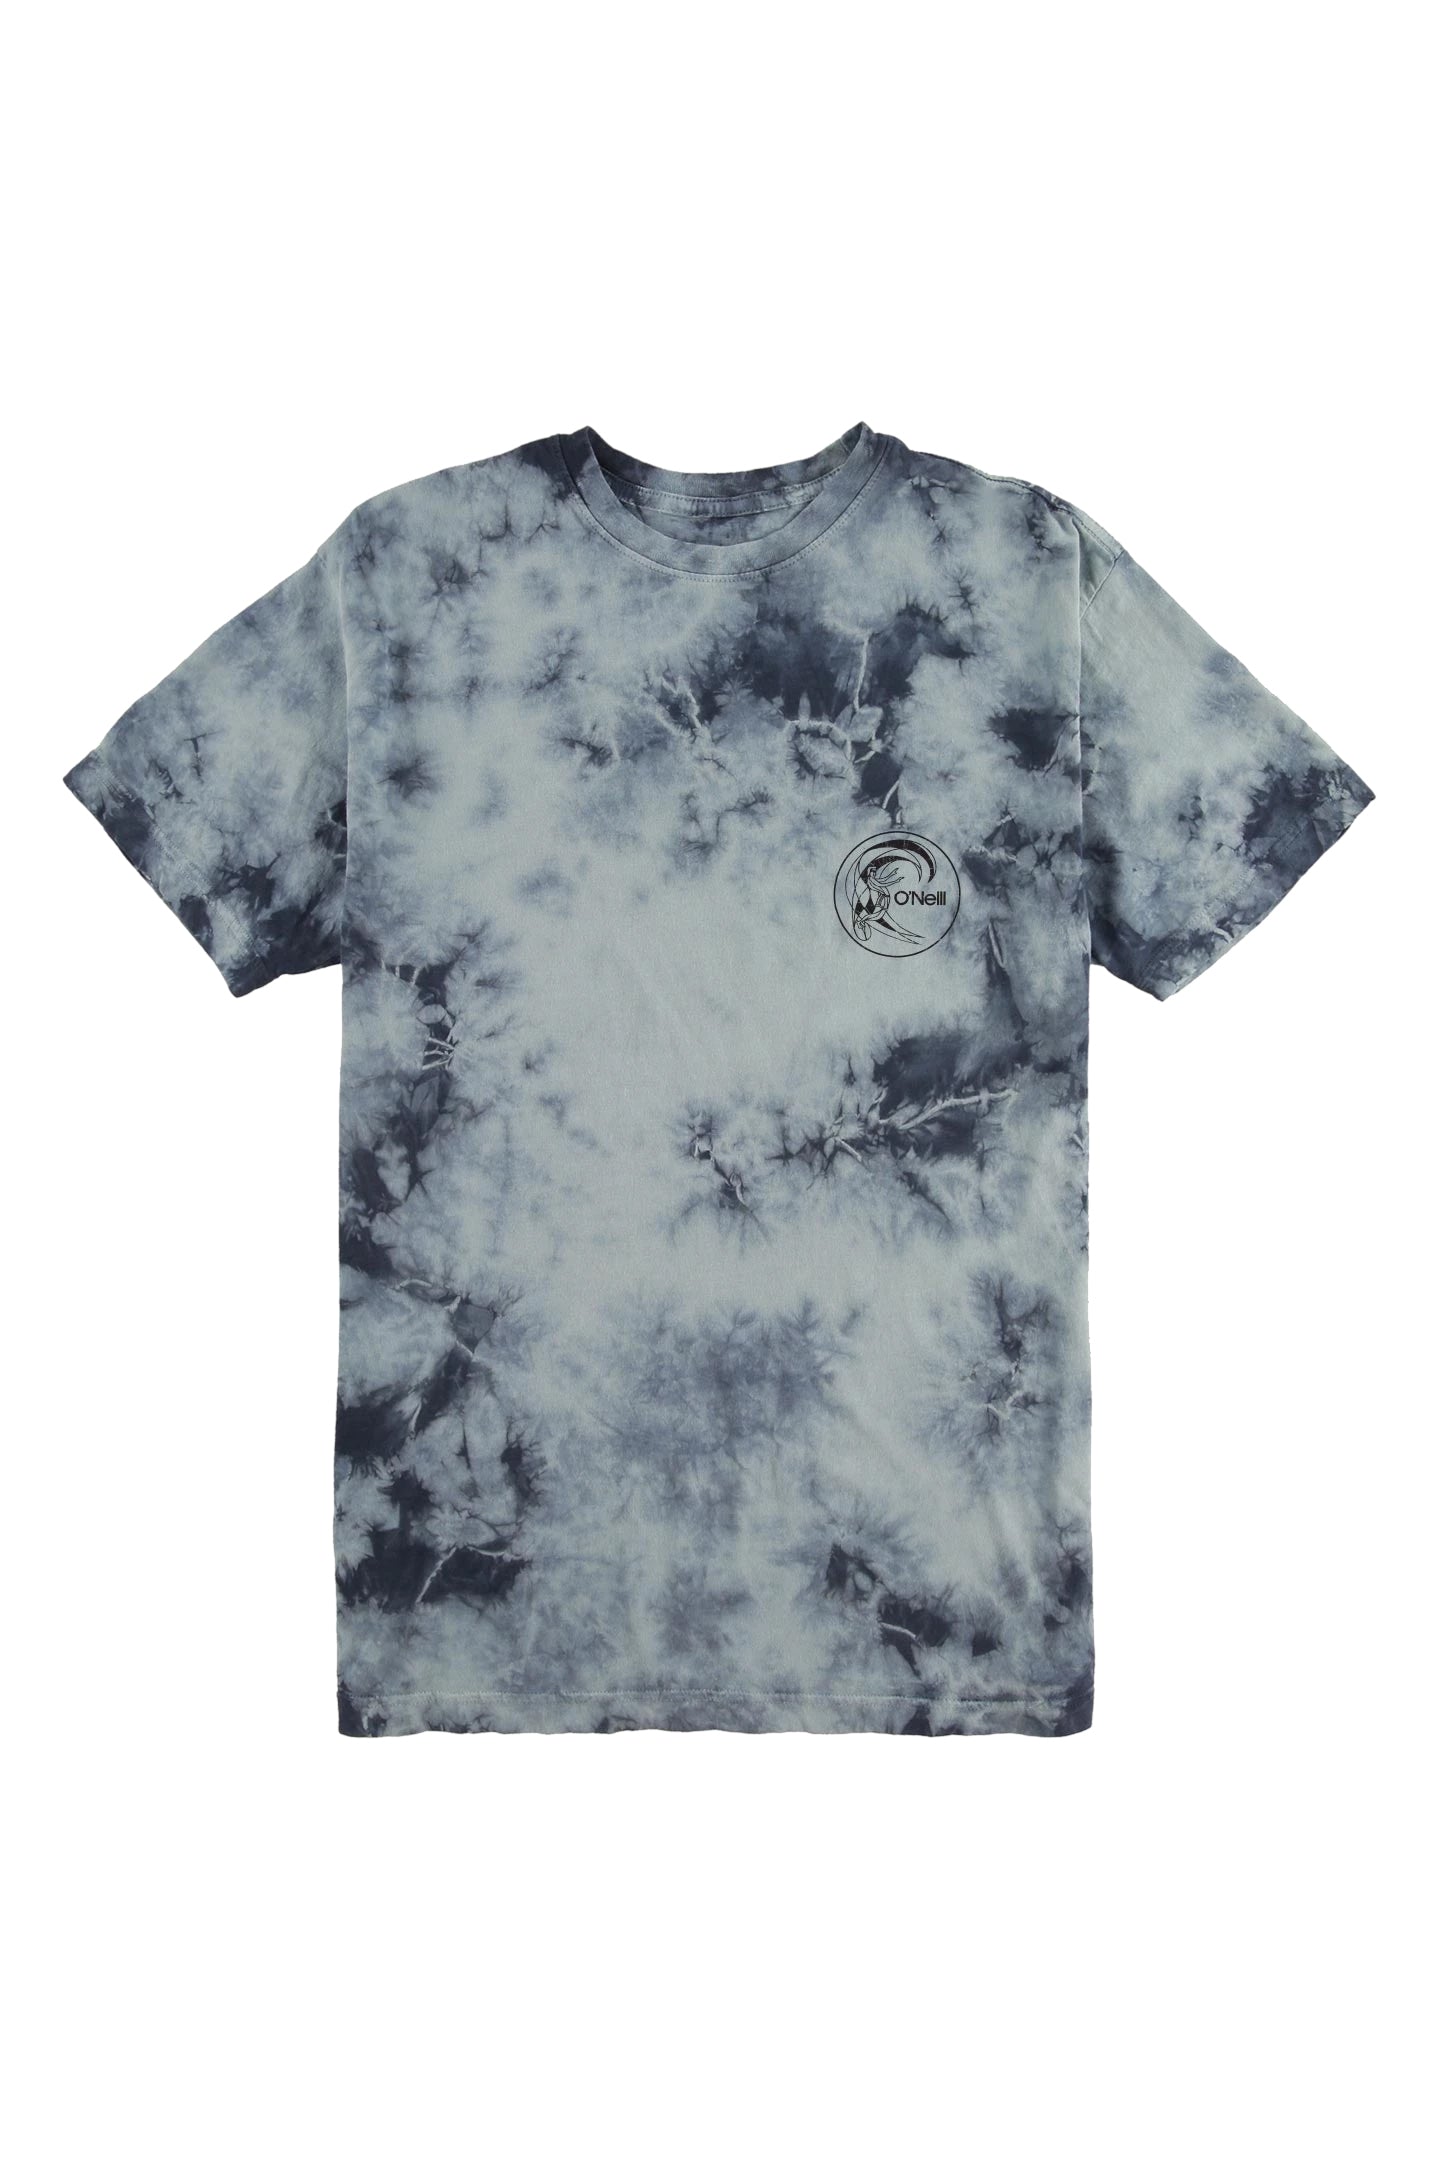 O'neill Psyched Tee SMO-SmokeWash L